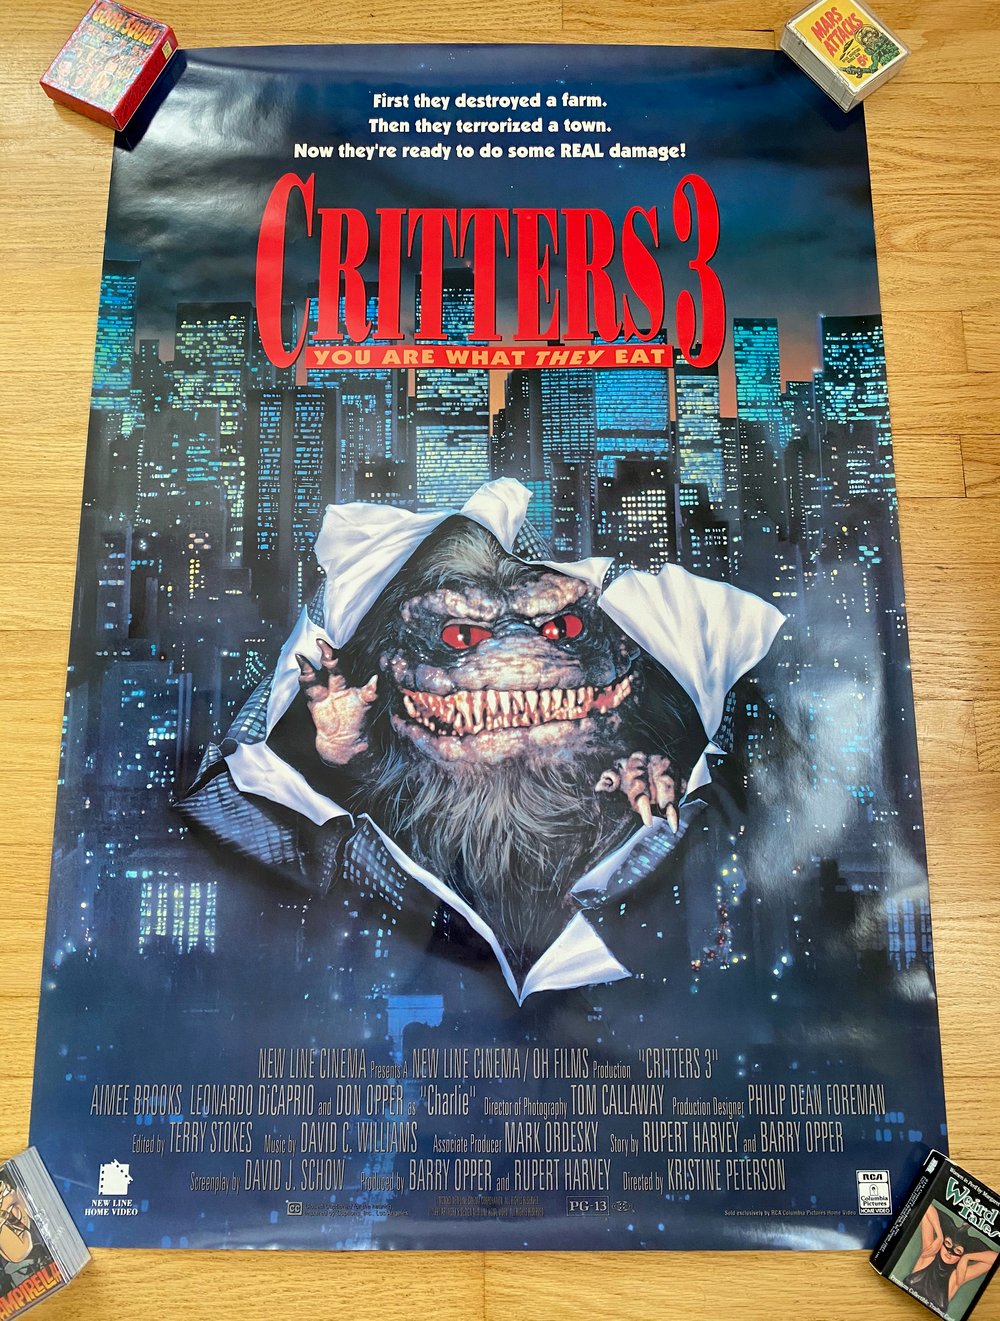 1991 CRITTERS 3 Original New Line Cinema Home Video Promotional Movie Poster